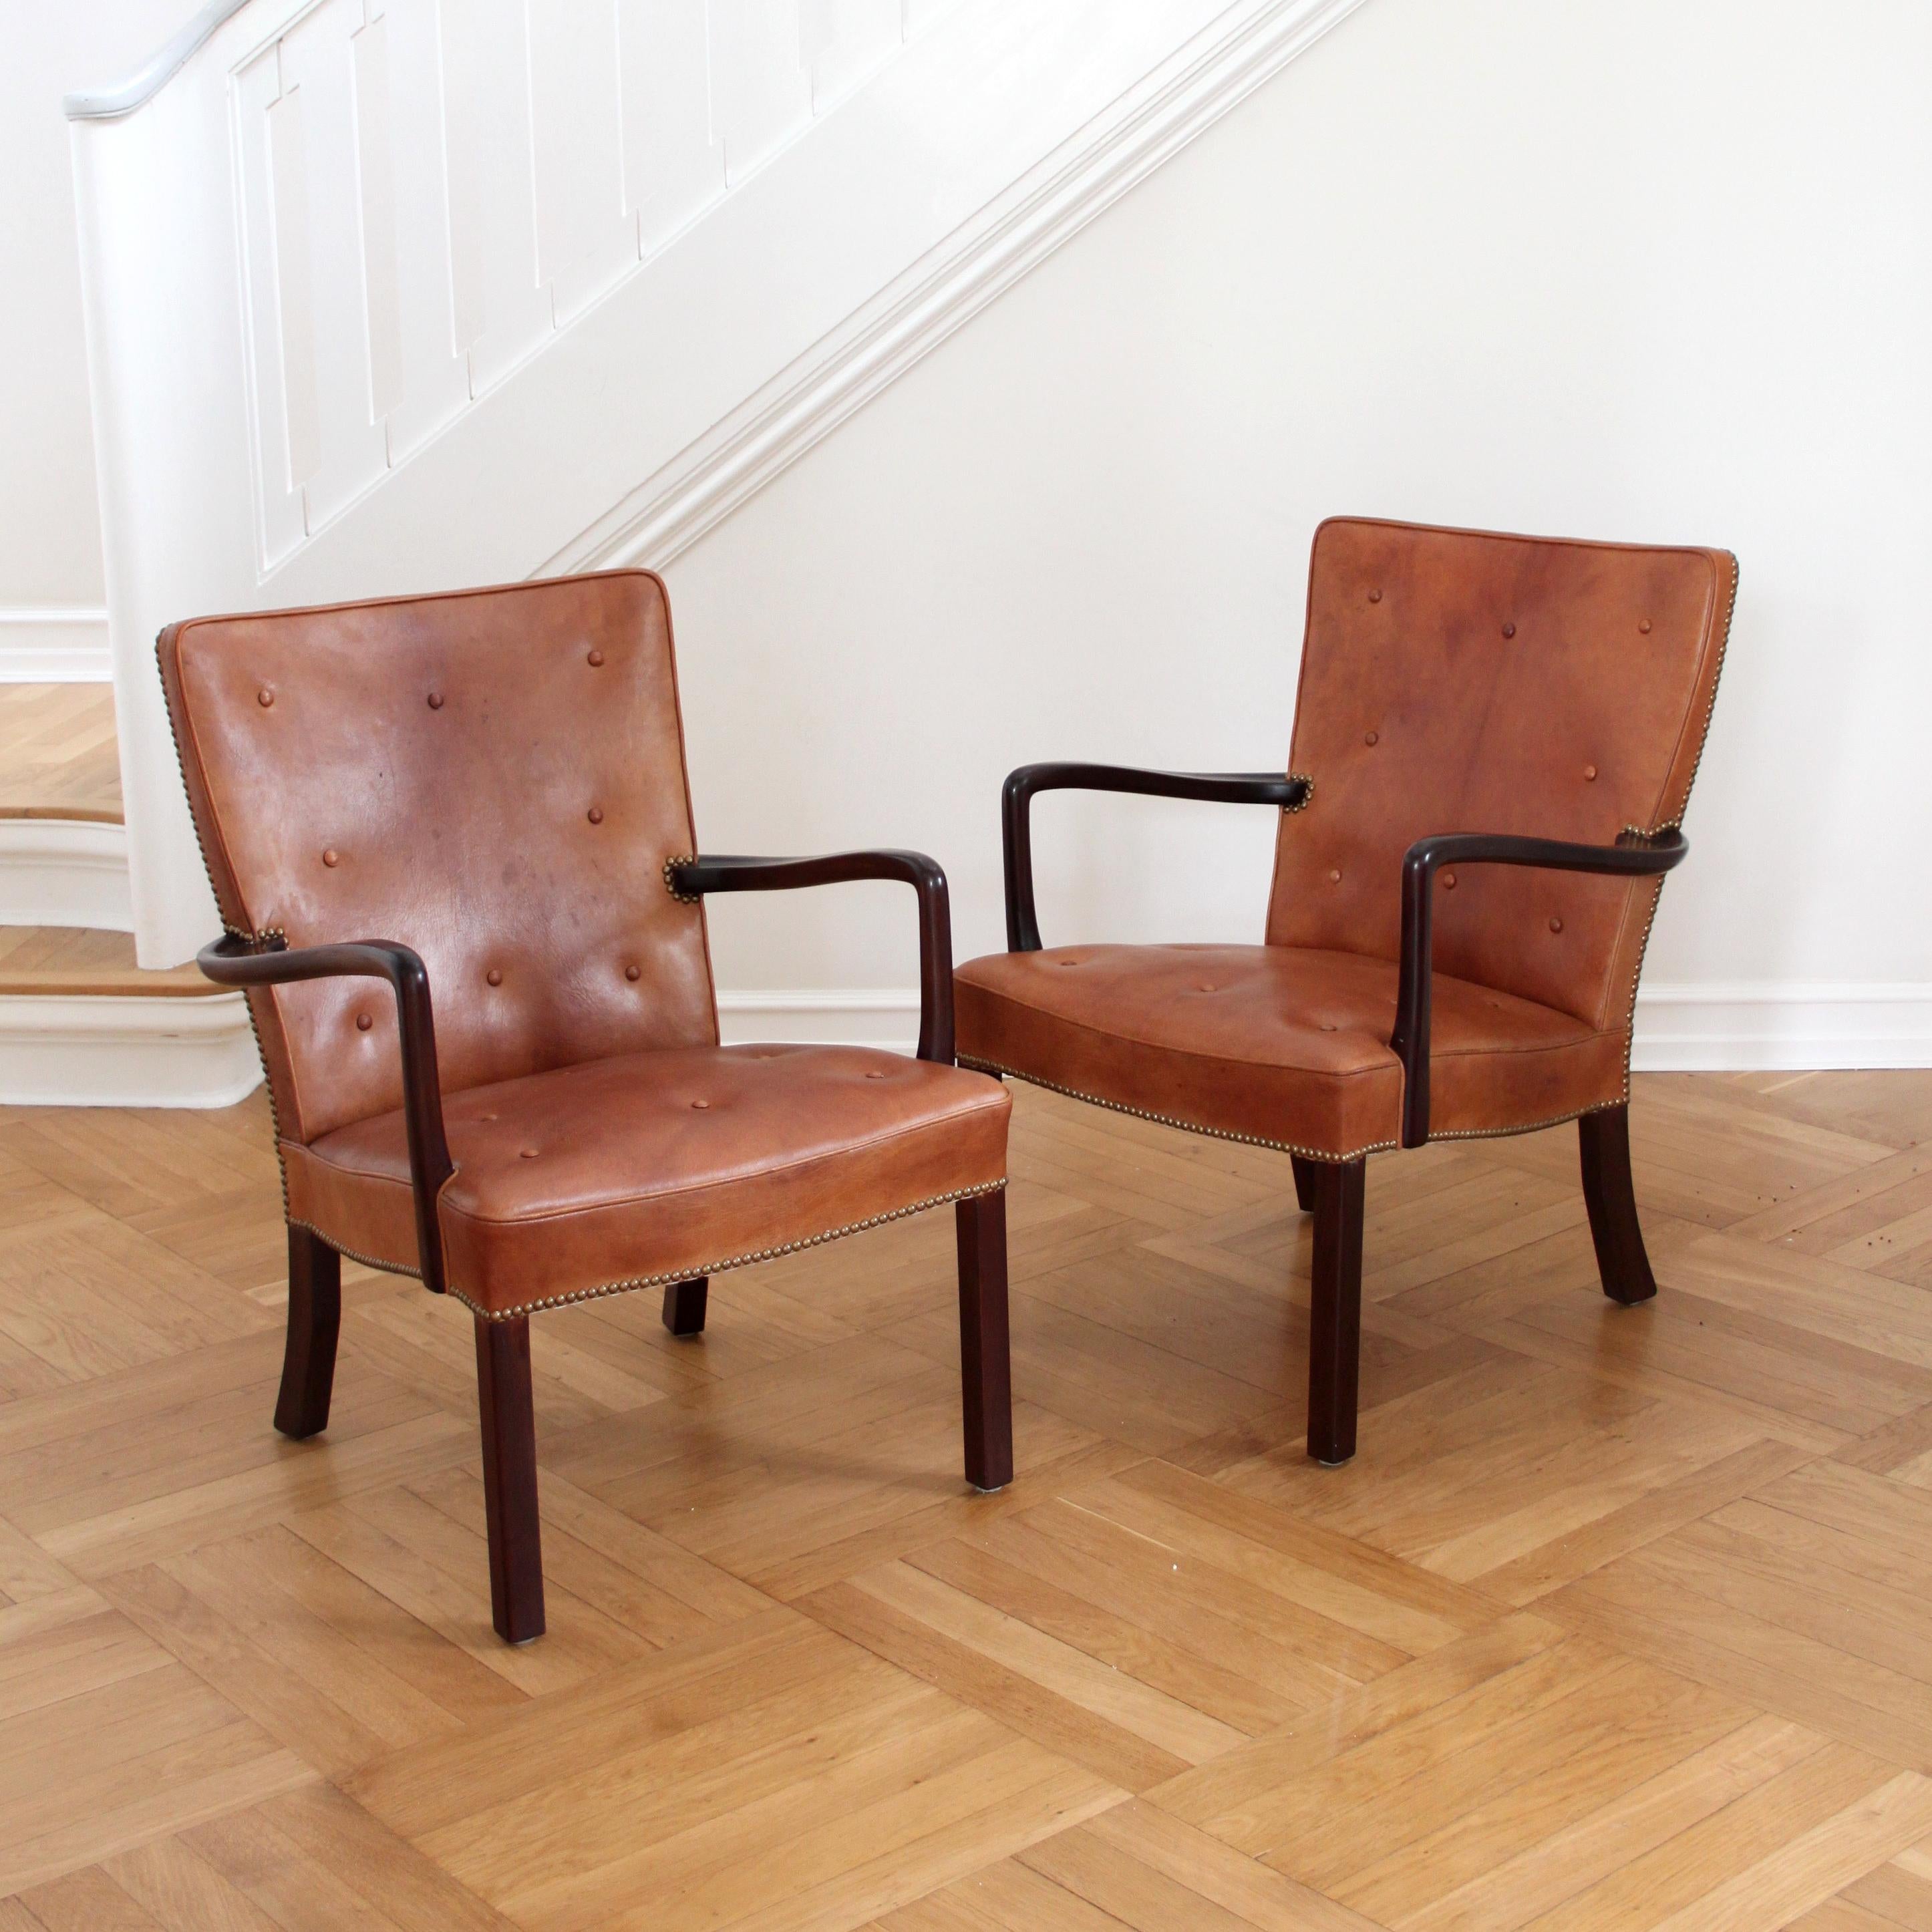 20th Century Pair of Jacob Kjær Lounge Chairs in Dark Stained Mahogany and Niger Leather